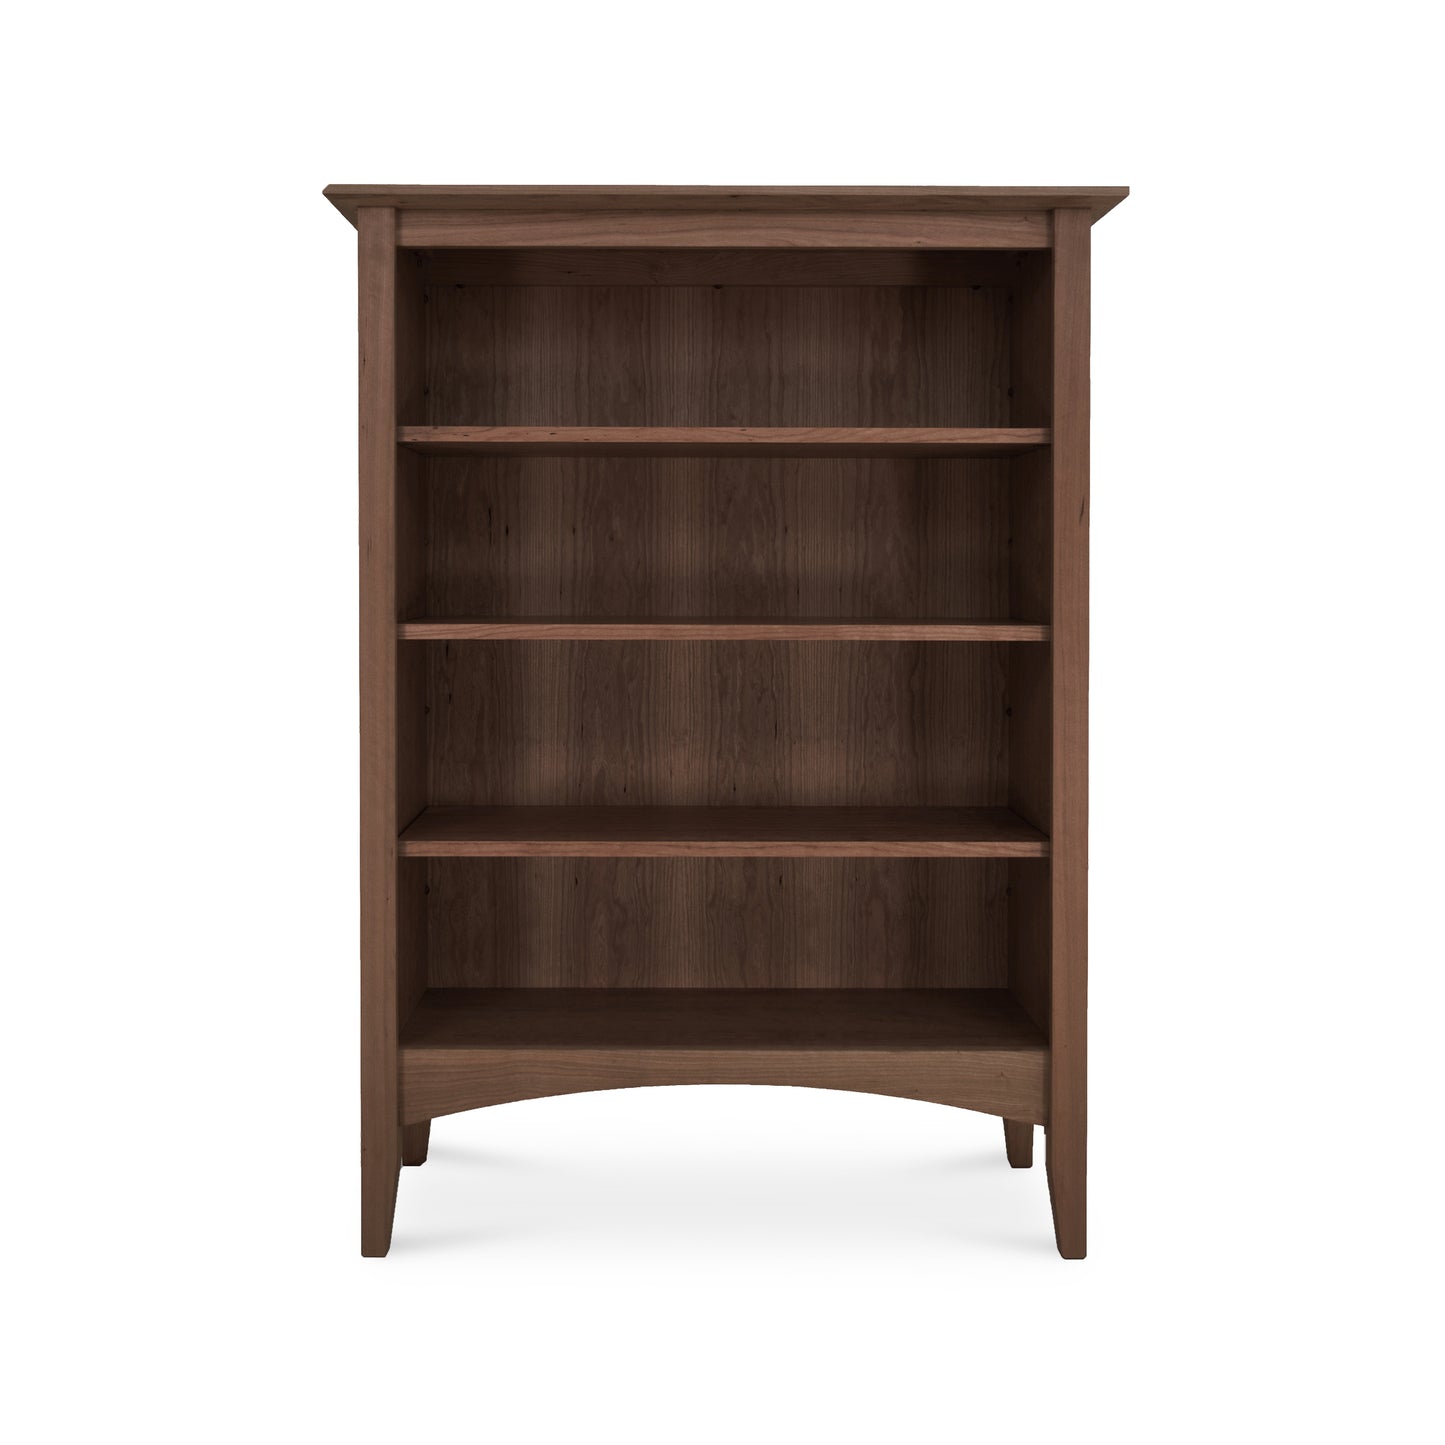 A Maple Corner Woodworks American Shaker Bookcase, crafted from sustainably harvested hardwoods, with four shelves, standing against a white background.